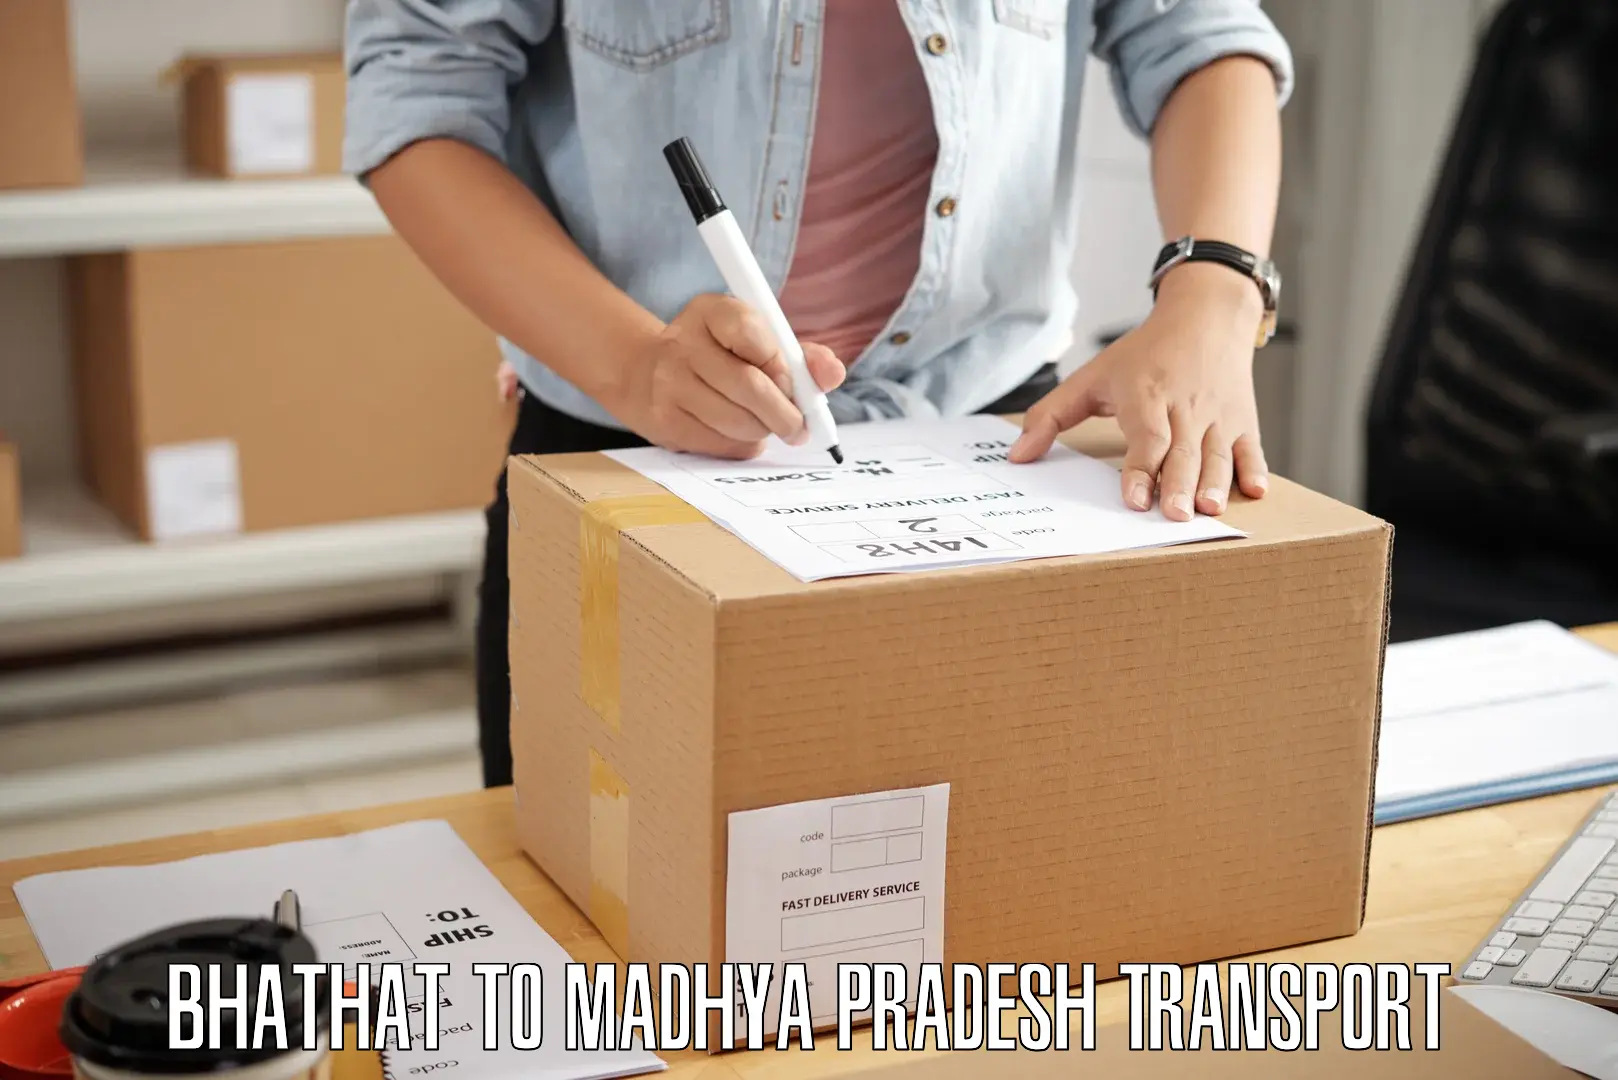 Delivery service Bhathat to Madhya Pradesh